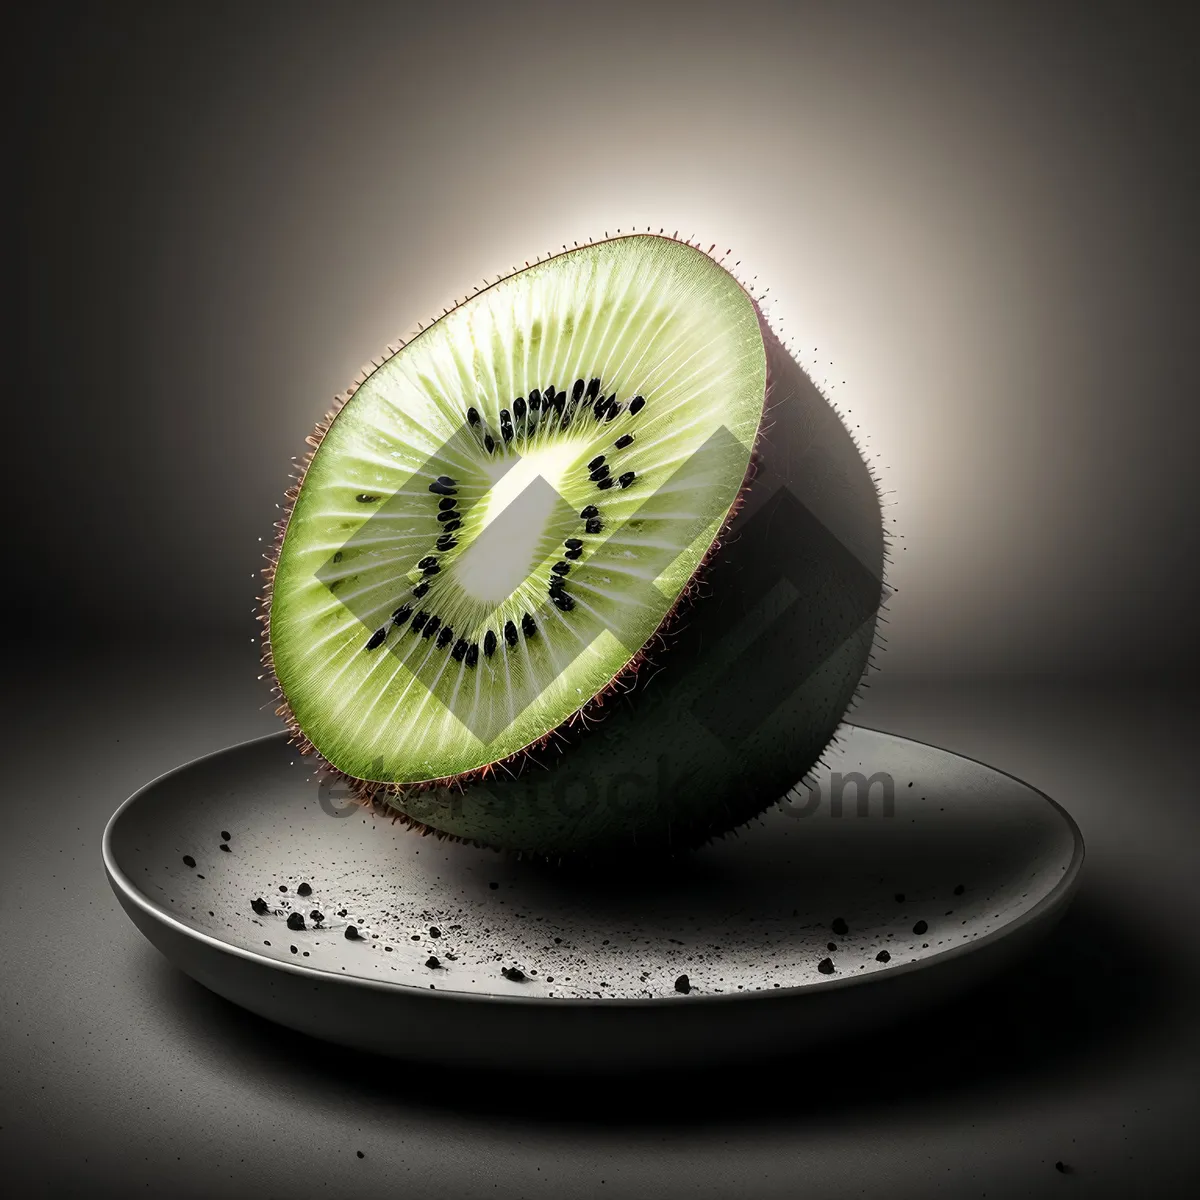 Picture of Juicy Kiwi Slice - Fresh, Healthy, and Delicious!